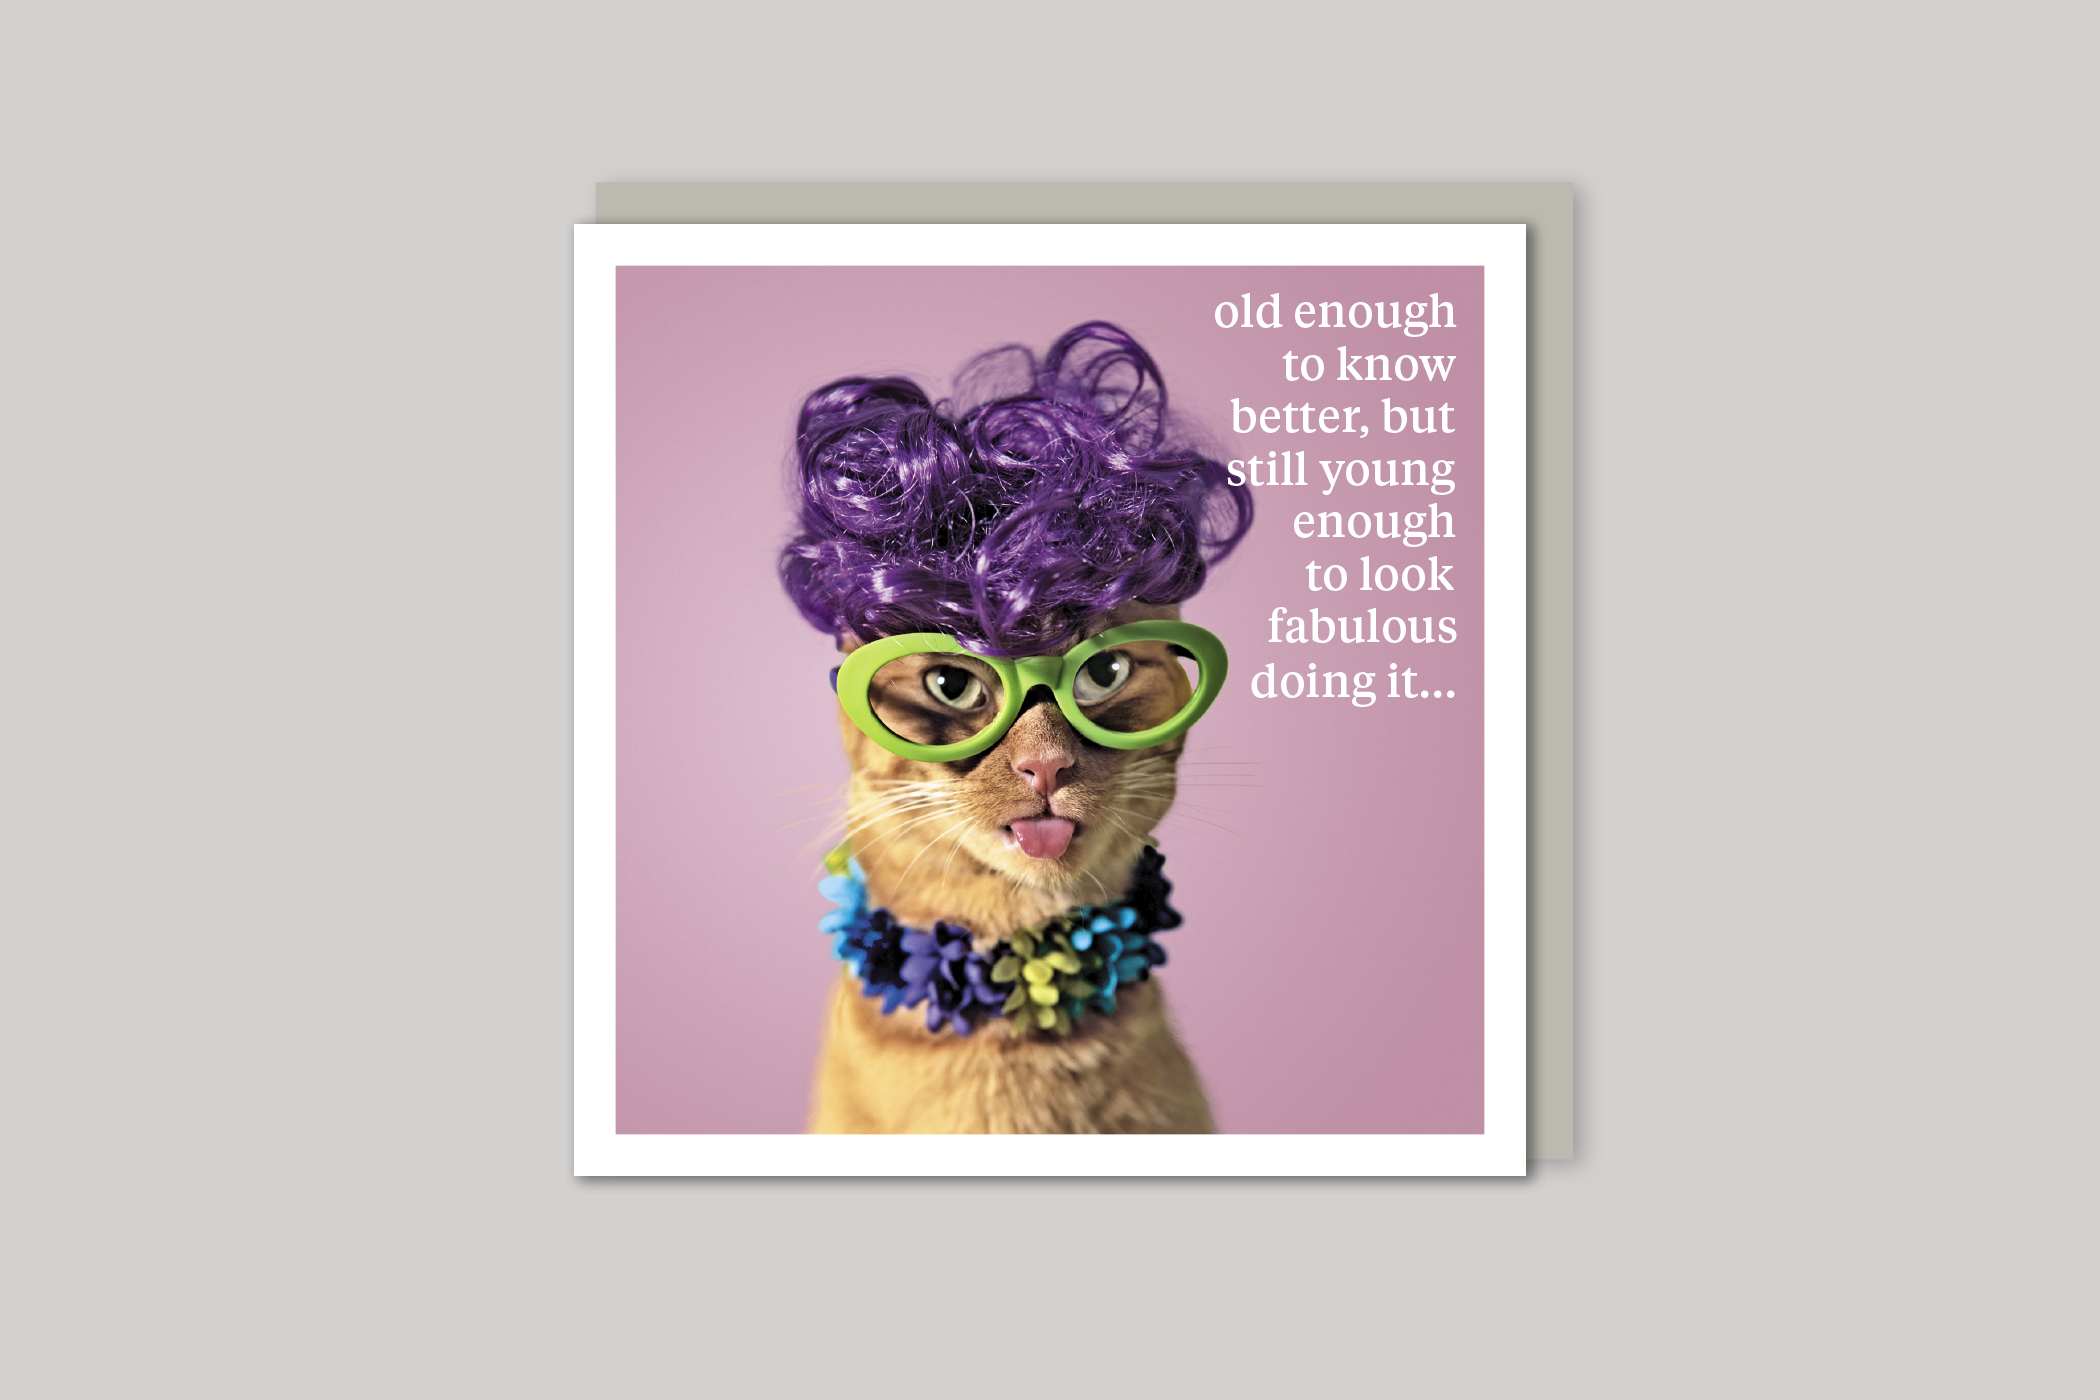 Still Young quirky animal portrait from Curious World range of greeting cards by Icon, back page.